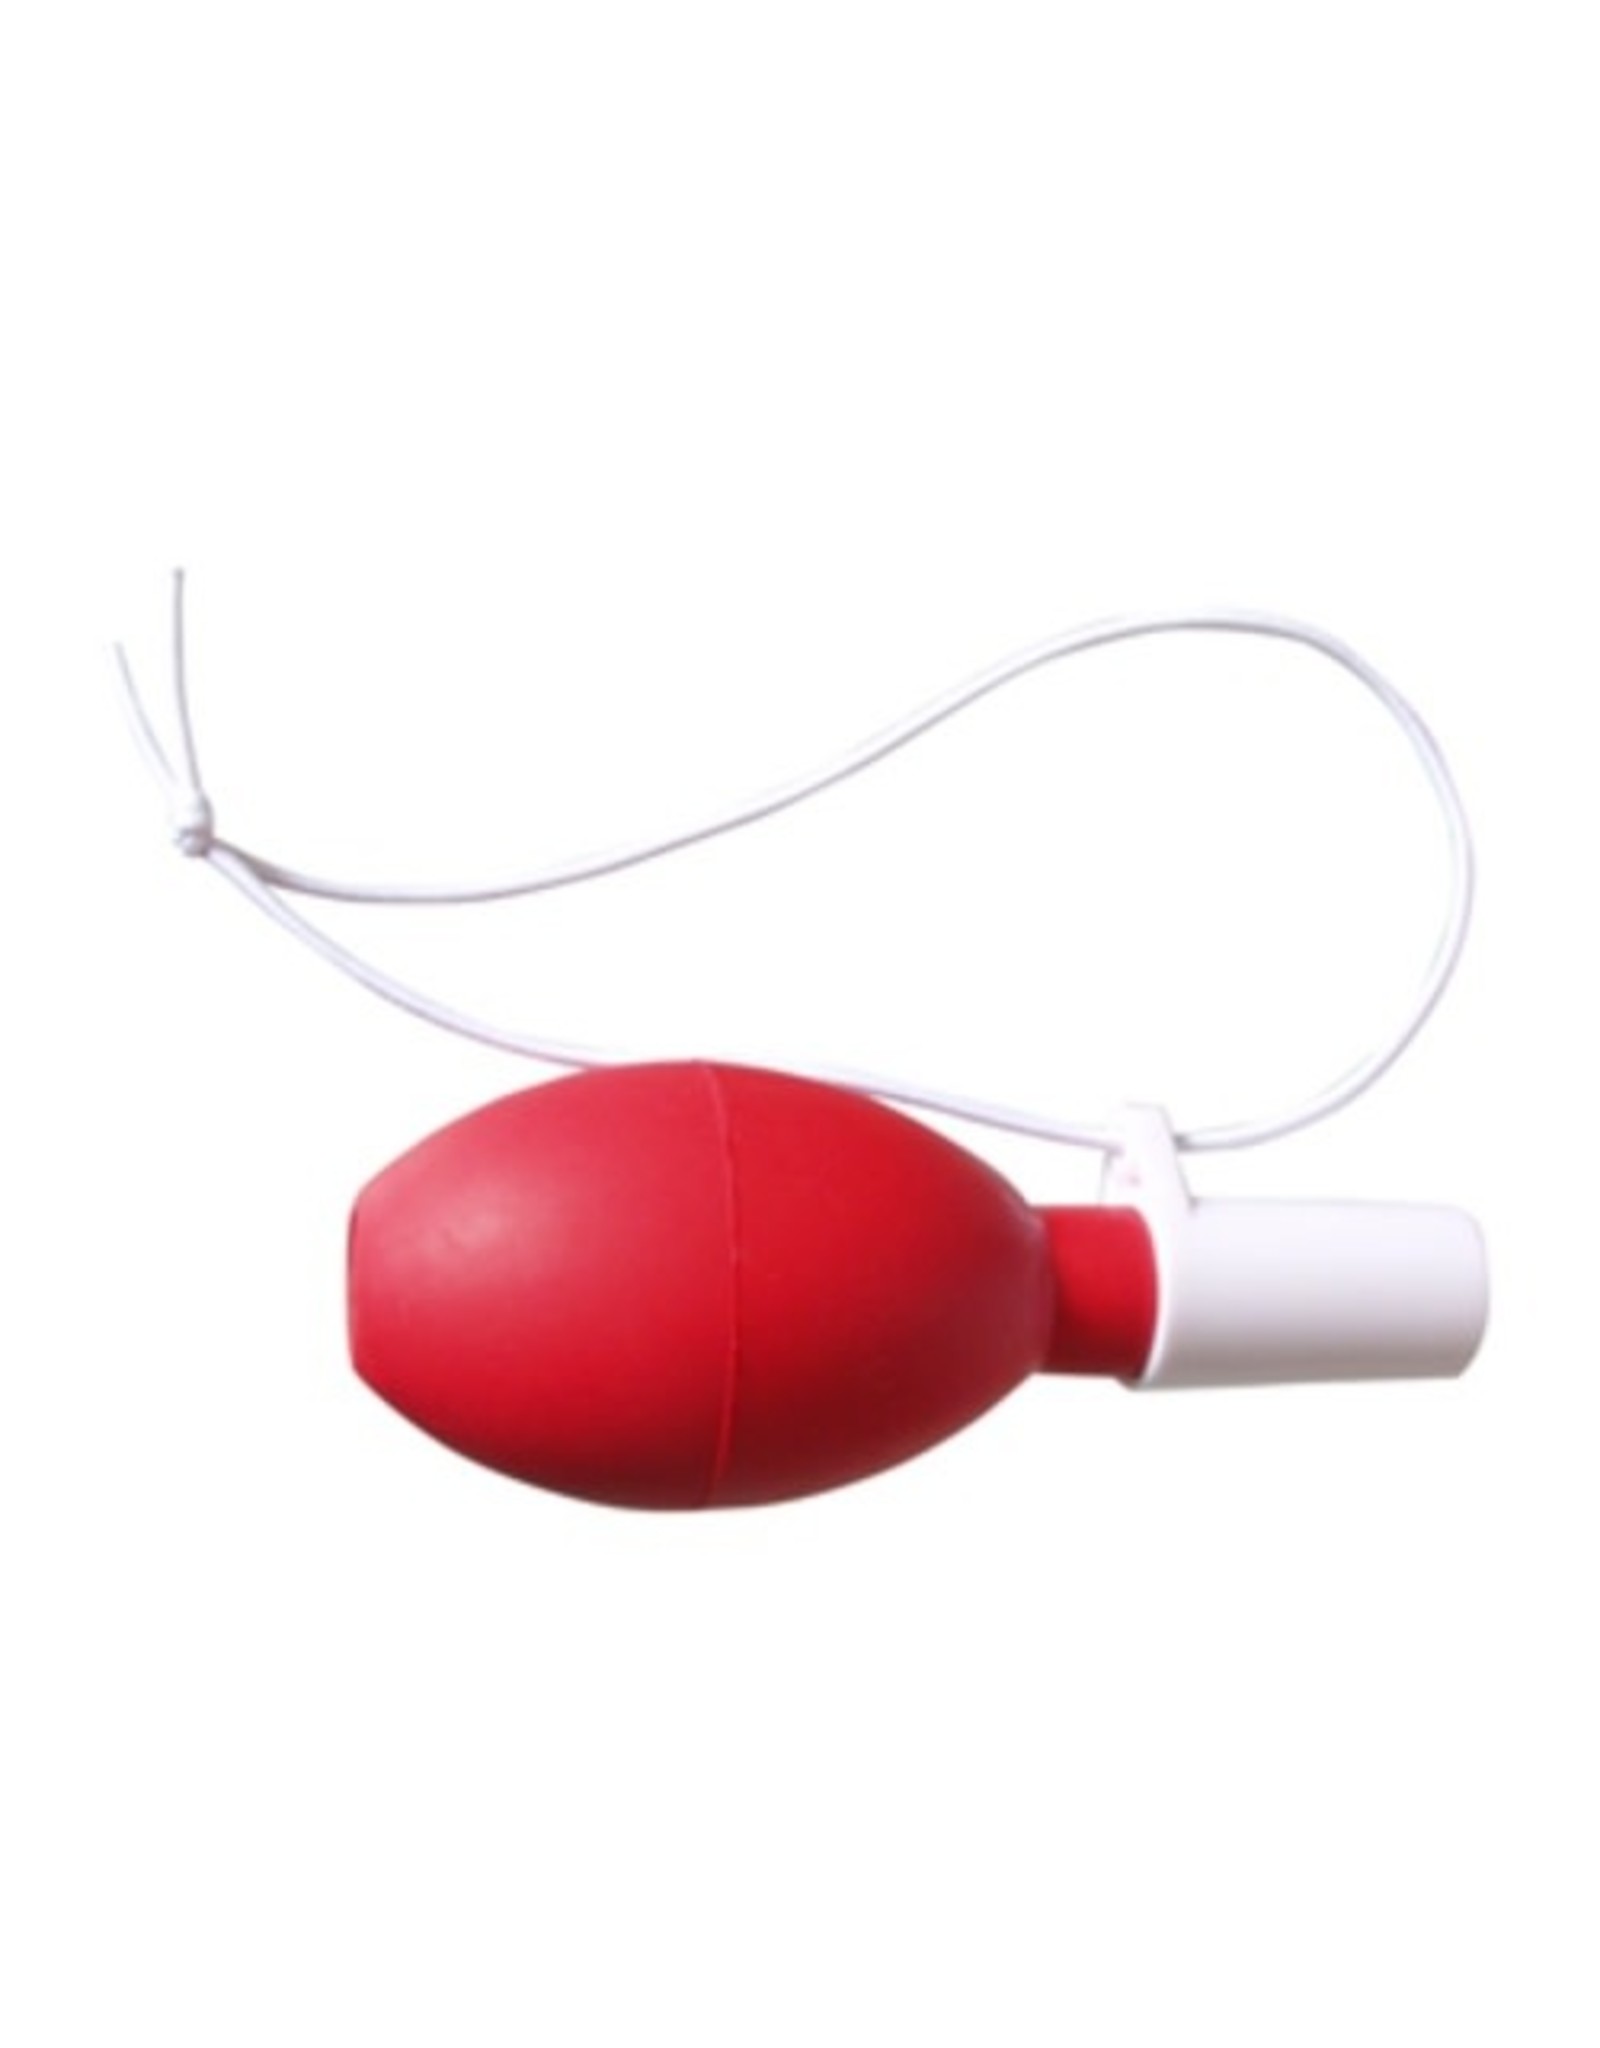 Pipette Filler (red rubber squeeze bulb for pipettes)